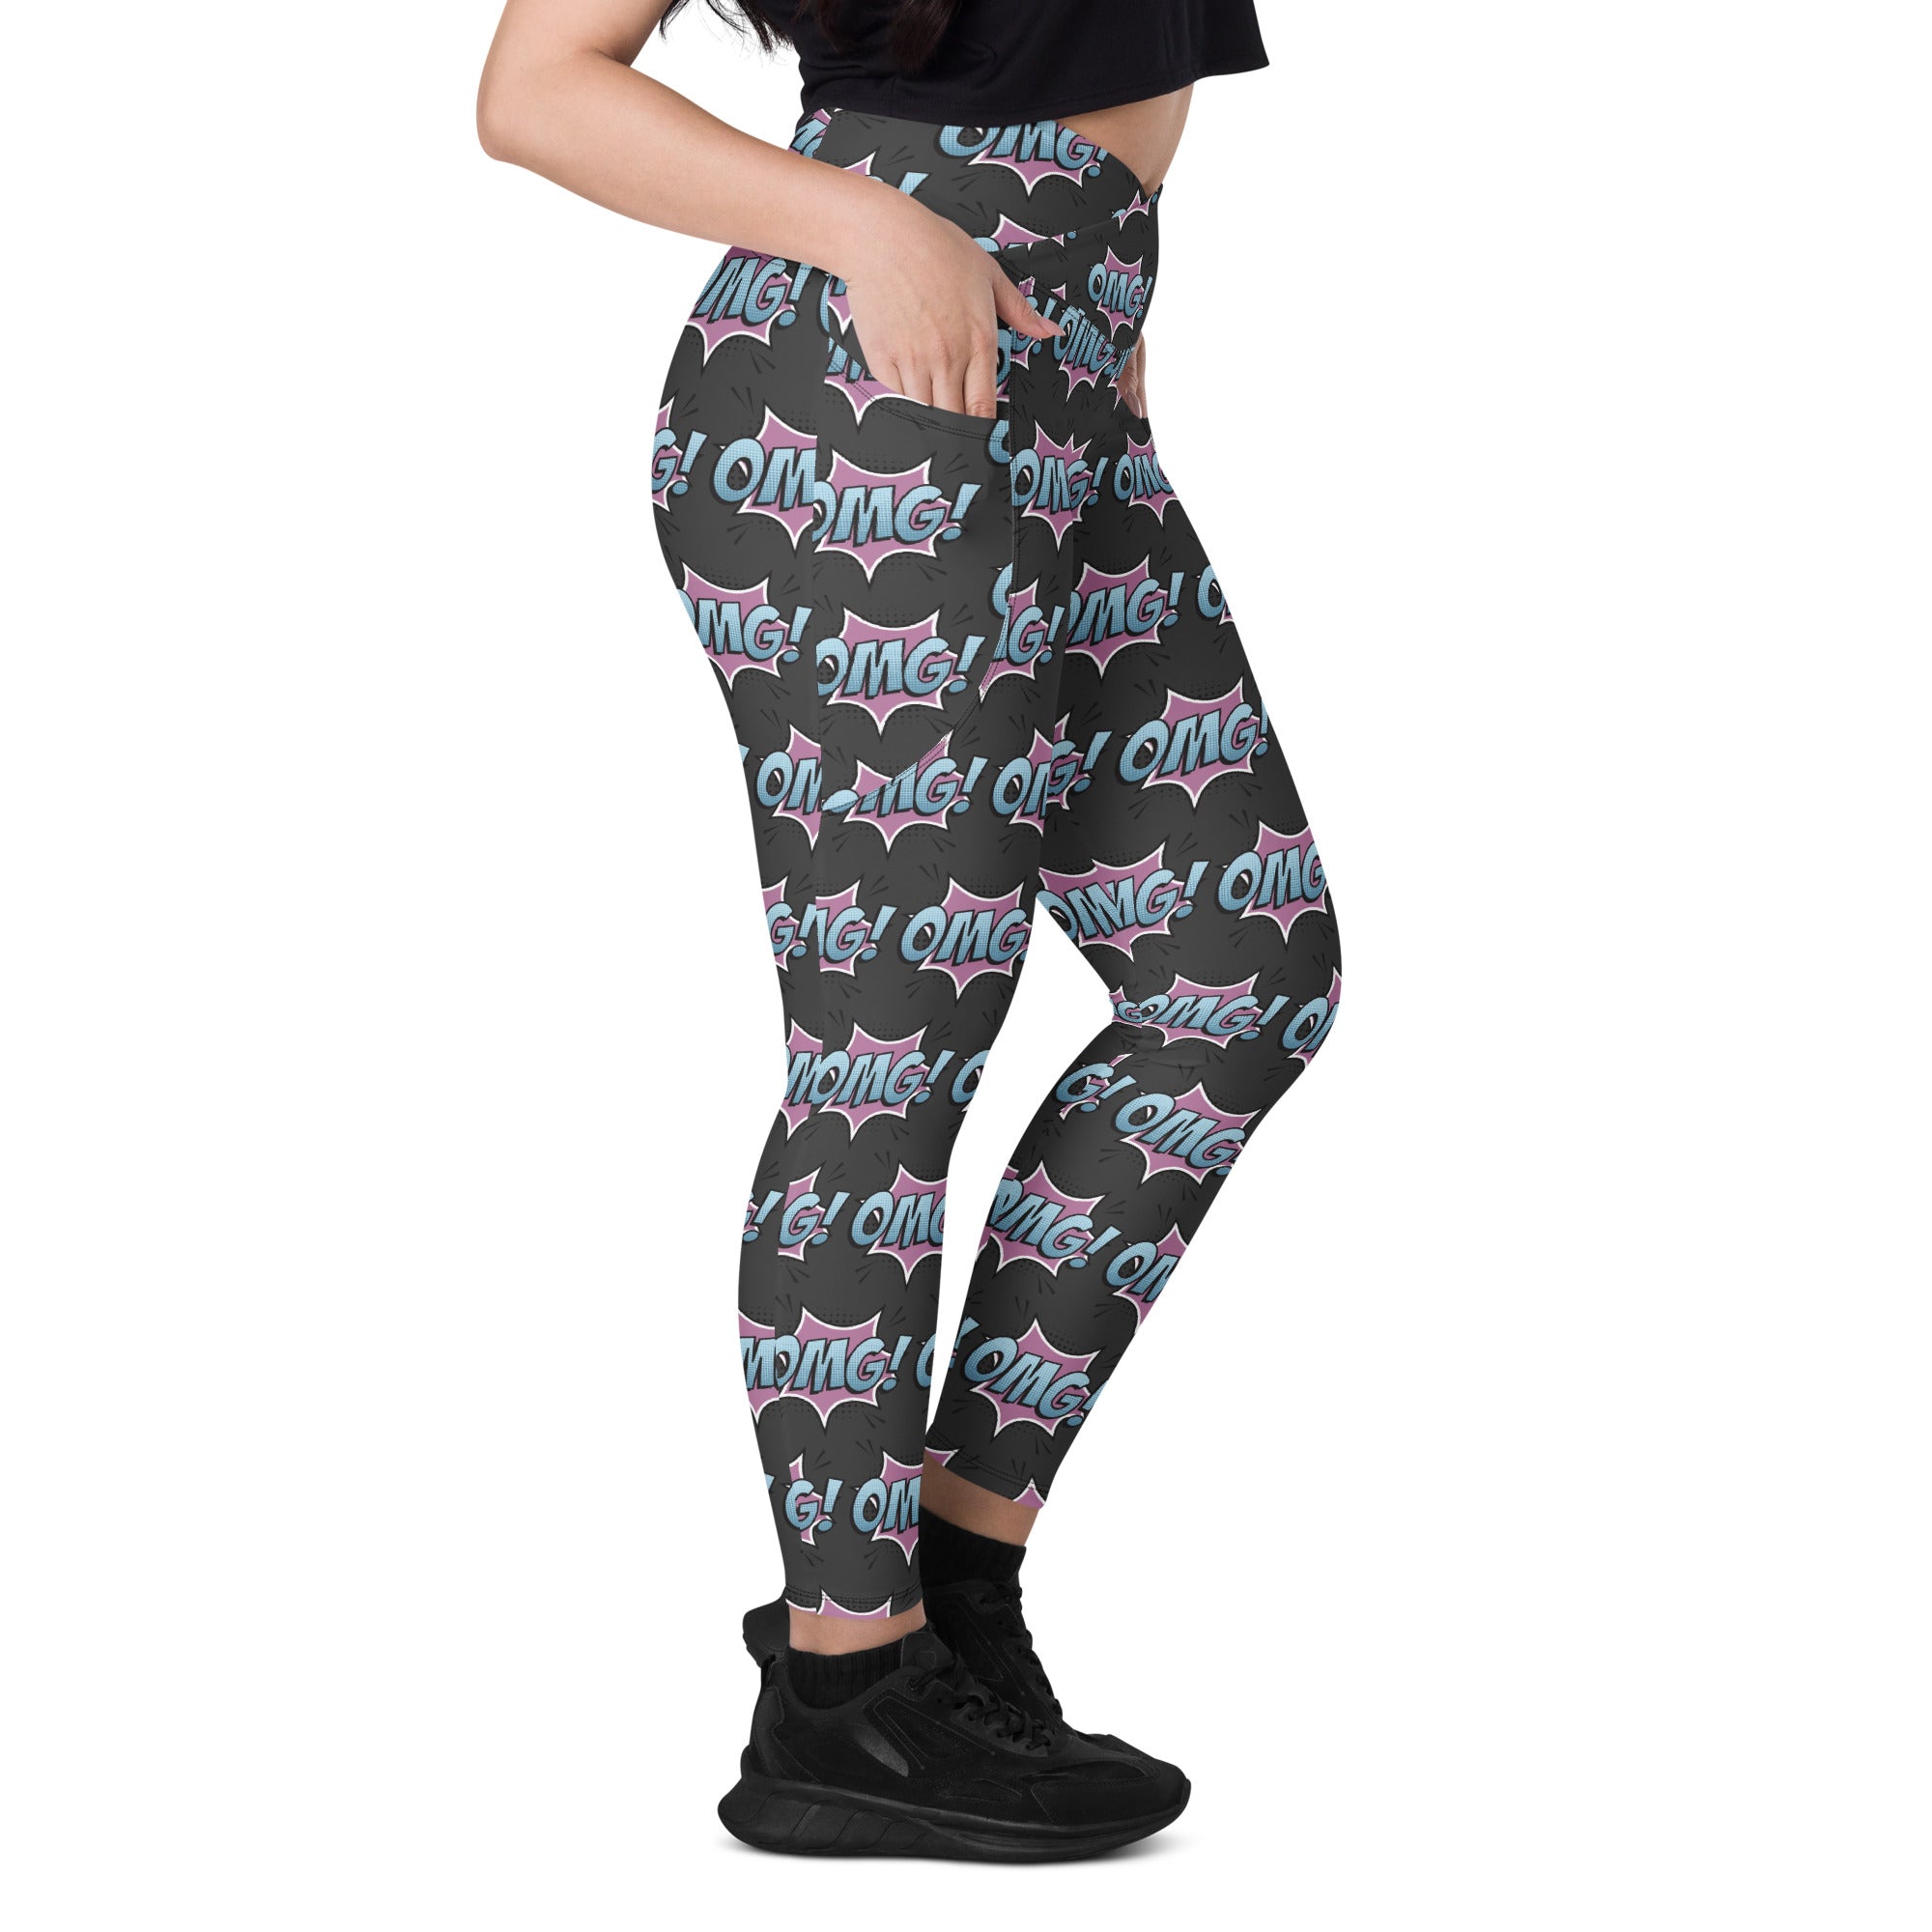 OMG! Crossover leggings with pockets